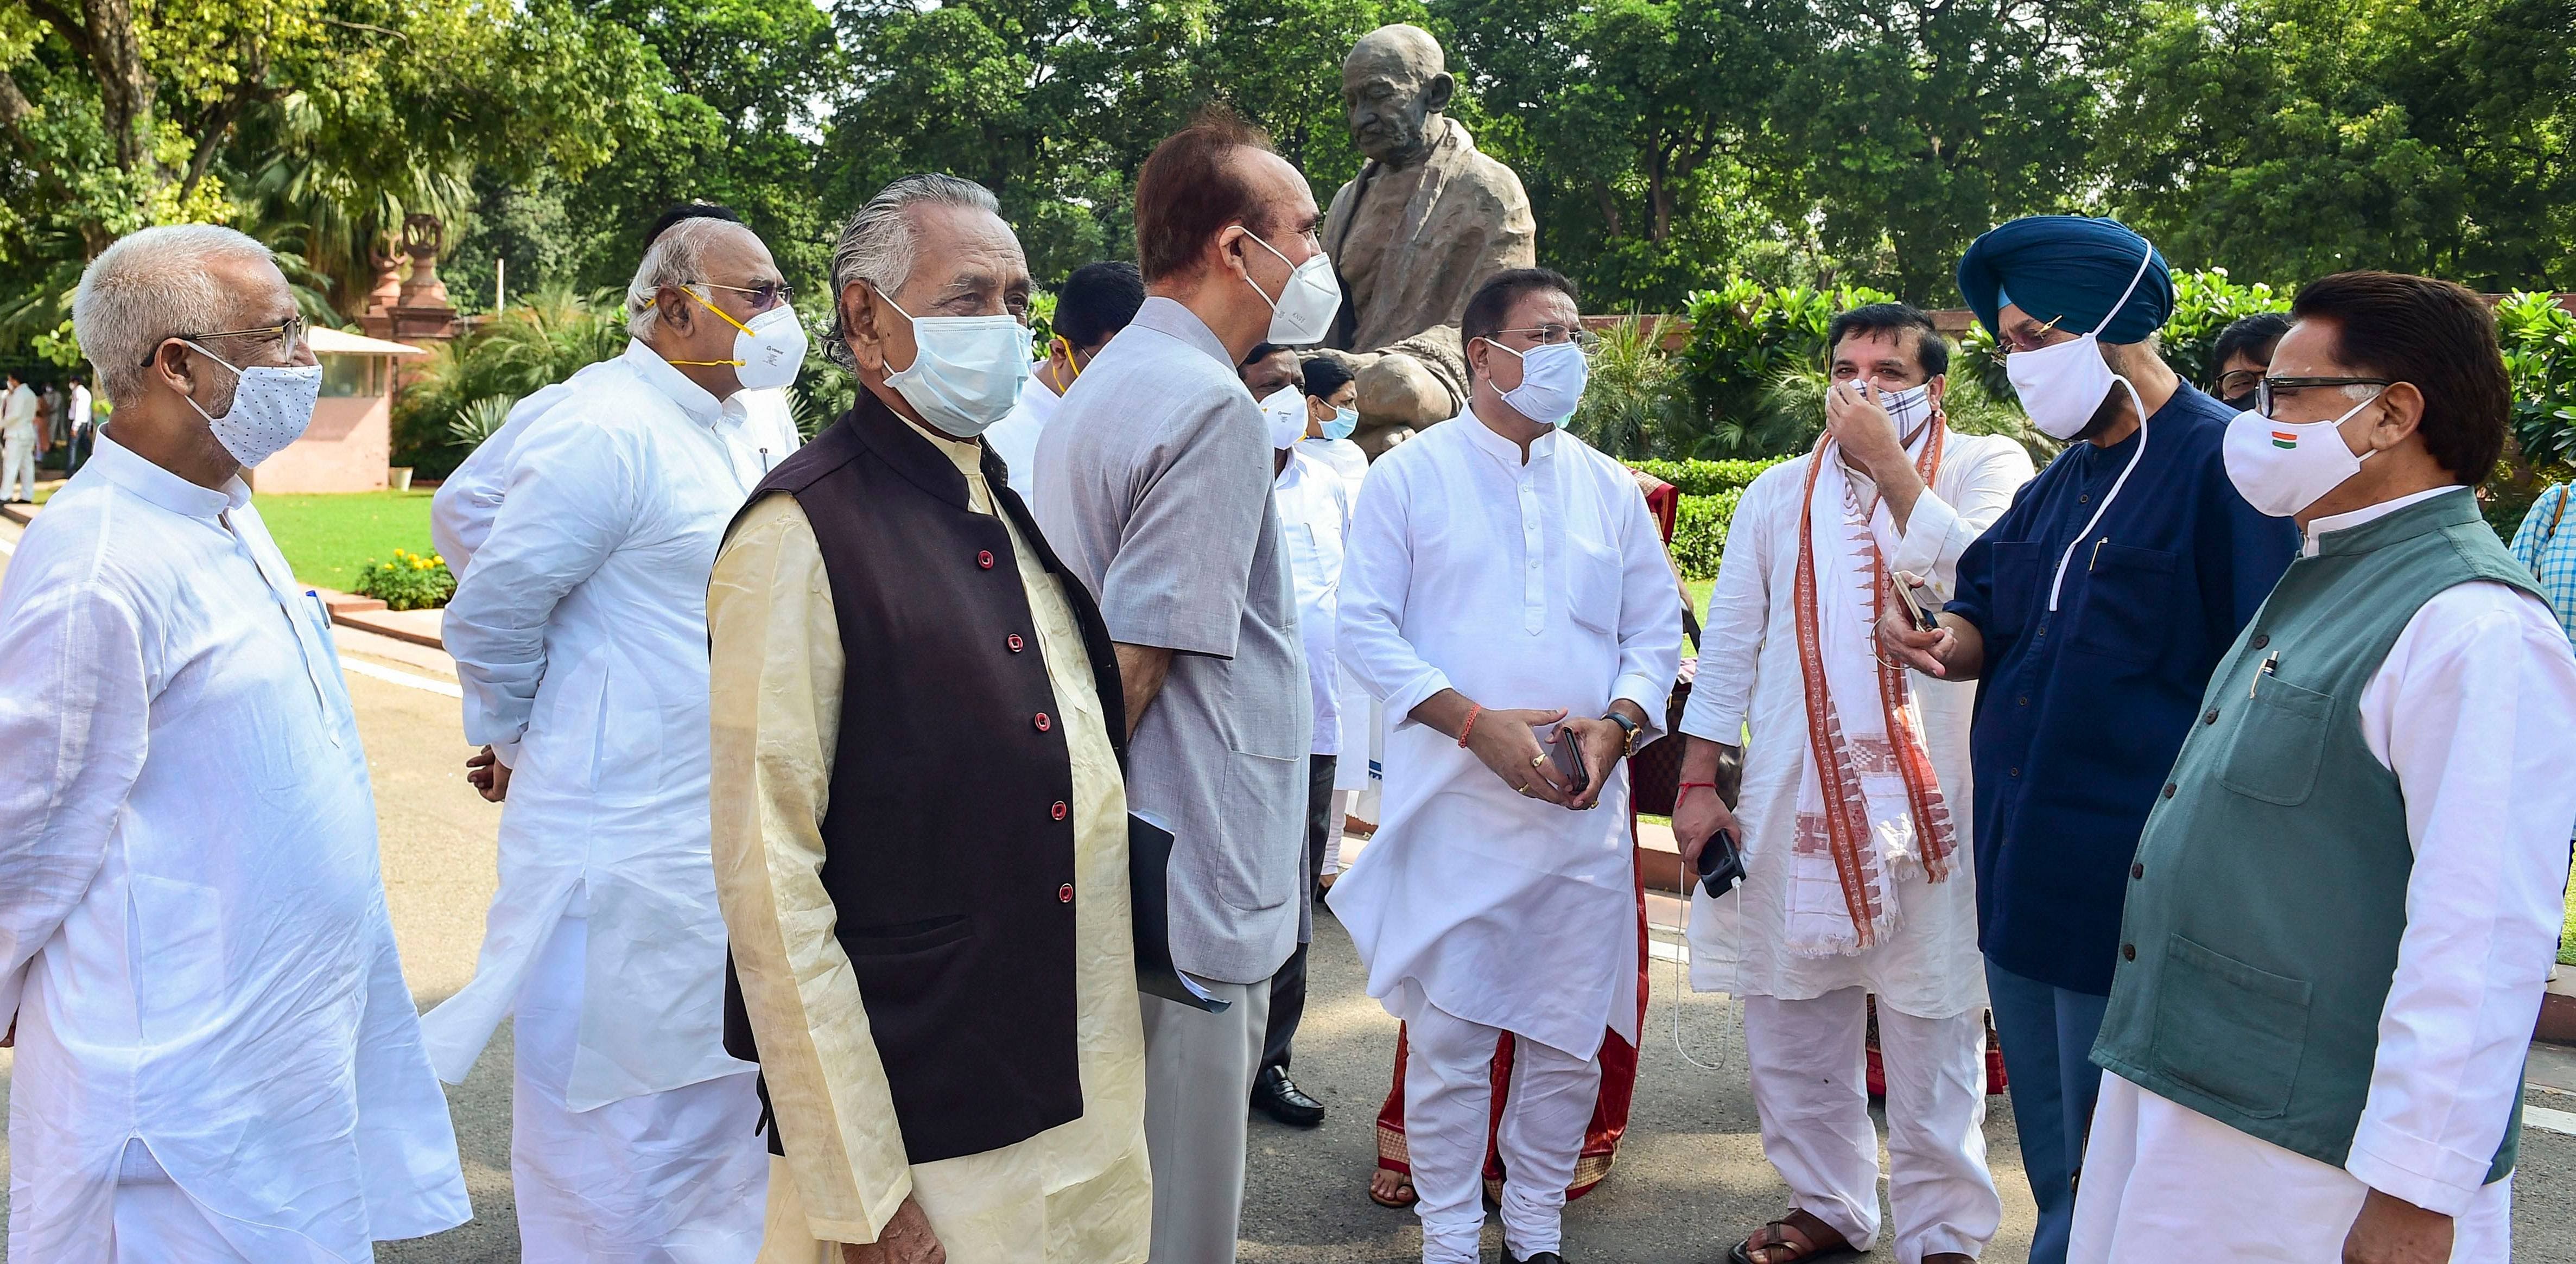 Congress MP Ghulam Nabi Azad and other opposition MPs stage a walkout from the Rajya Sabha, demanding suspension of 8 lawmakers be revoked, during the ongoing Monsoon Session of Parliament, at Parliament House in New Delhi. Credit: PTI